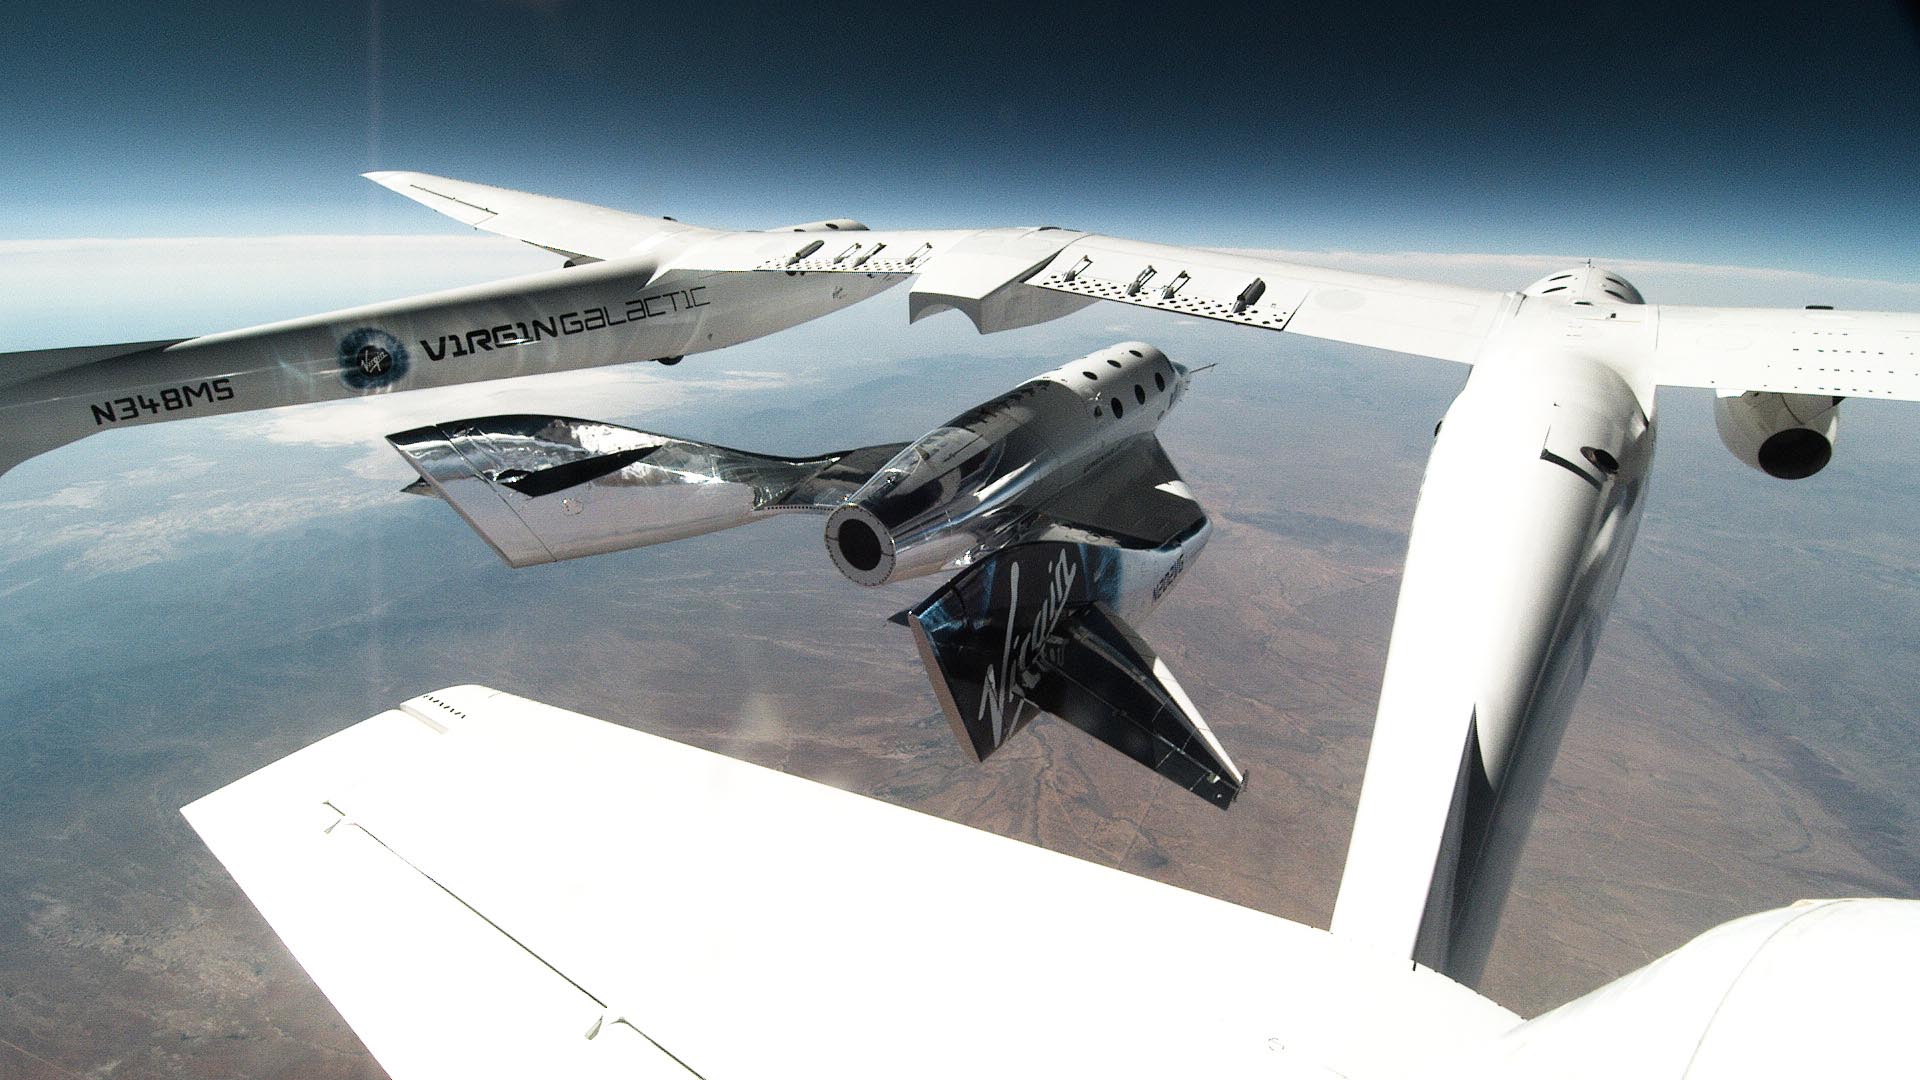 SpaceShipTwo_Unity_Released_From_VMS_Eve_for_Second_Glide_Flight_in_New_Mexico-1.jpg